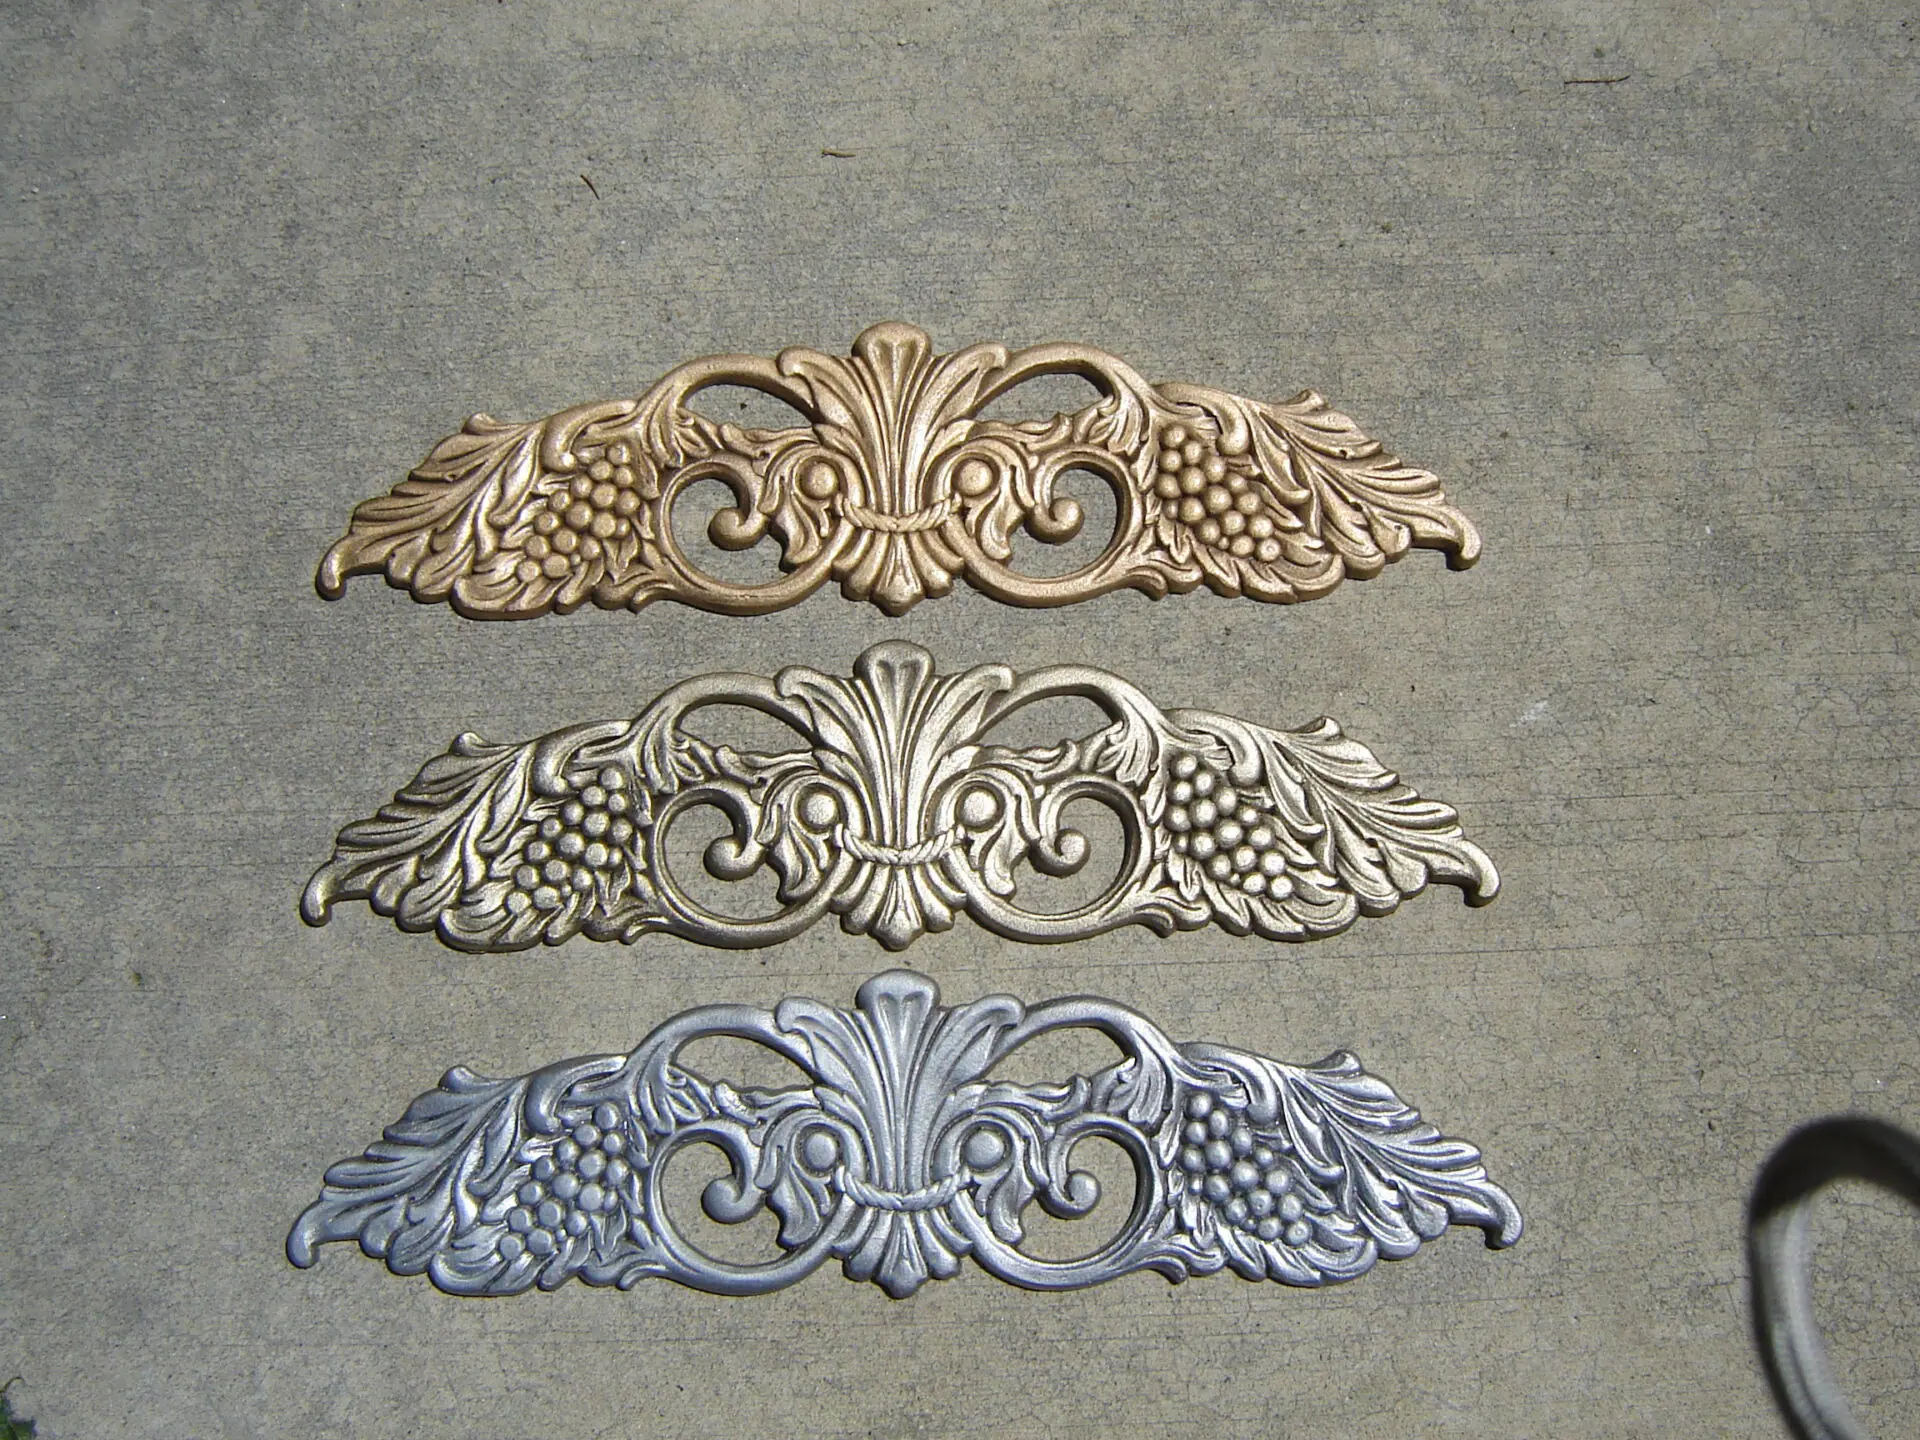 Bronze and Brass for Casting Alloys in Decorative Applications